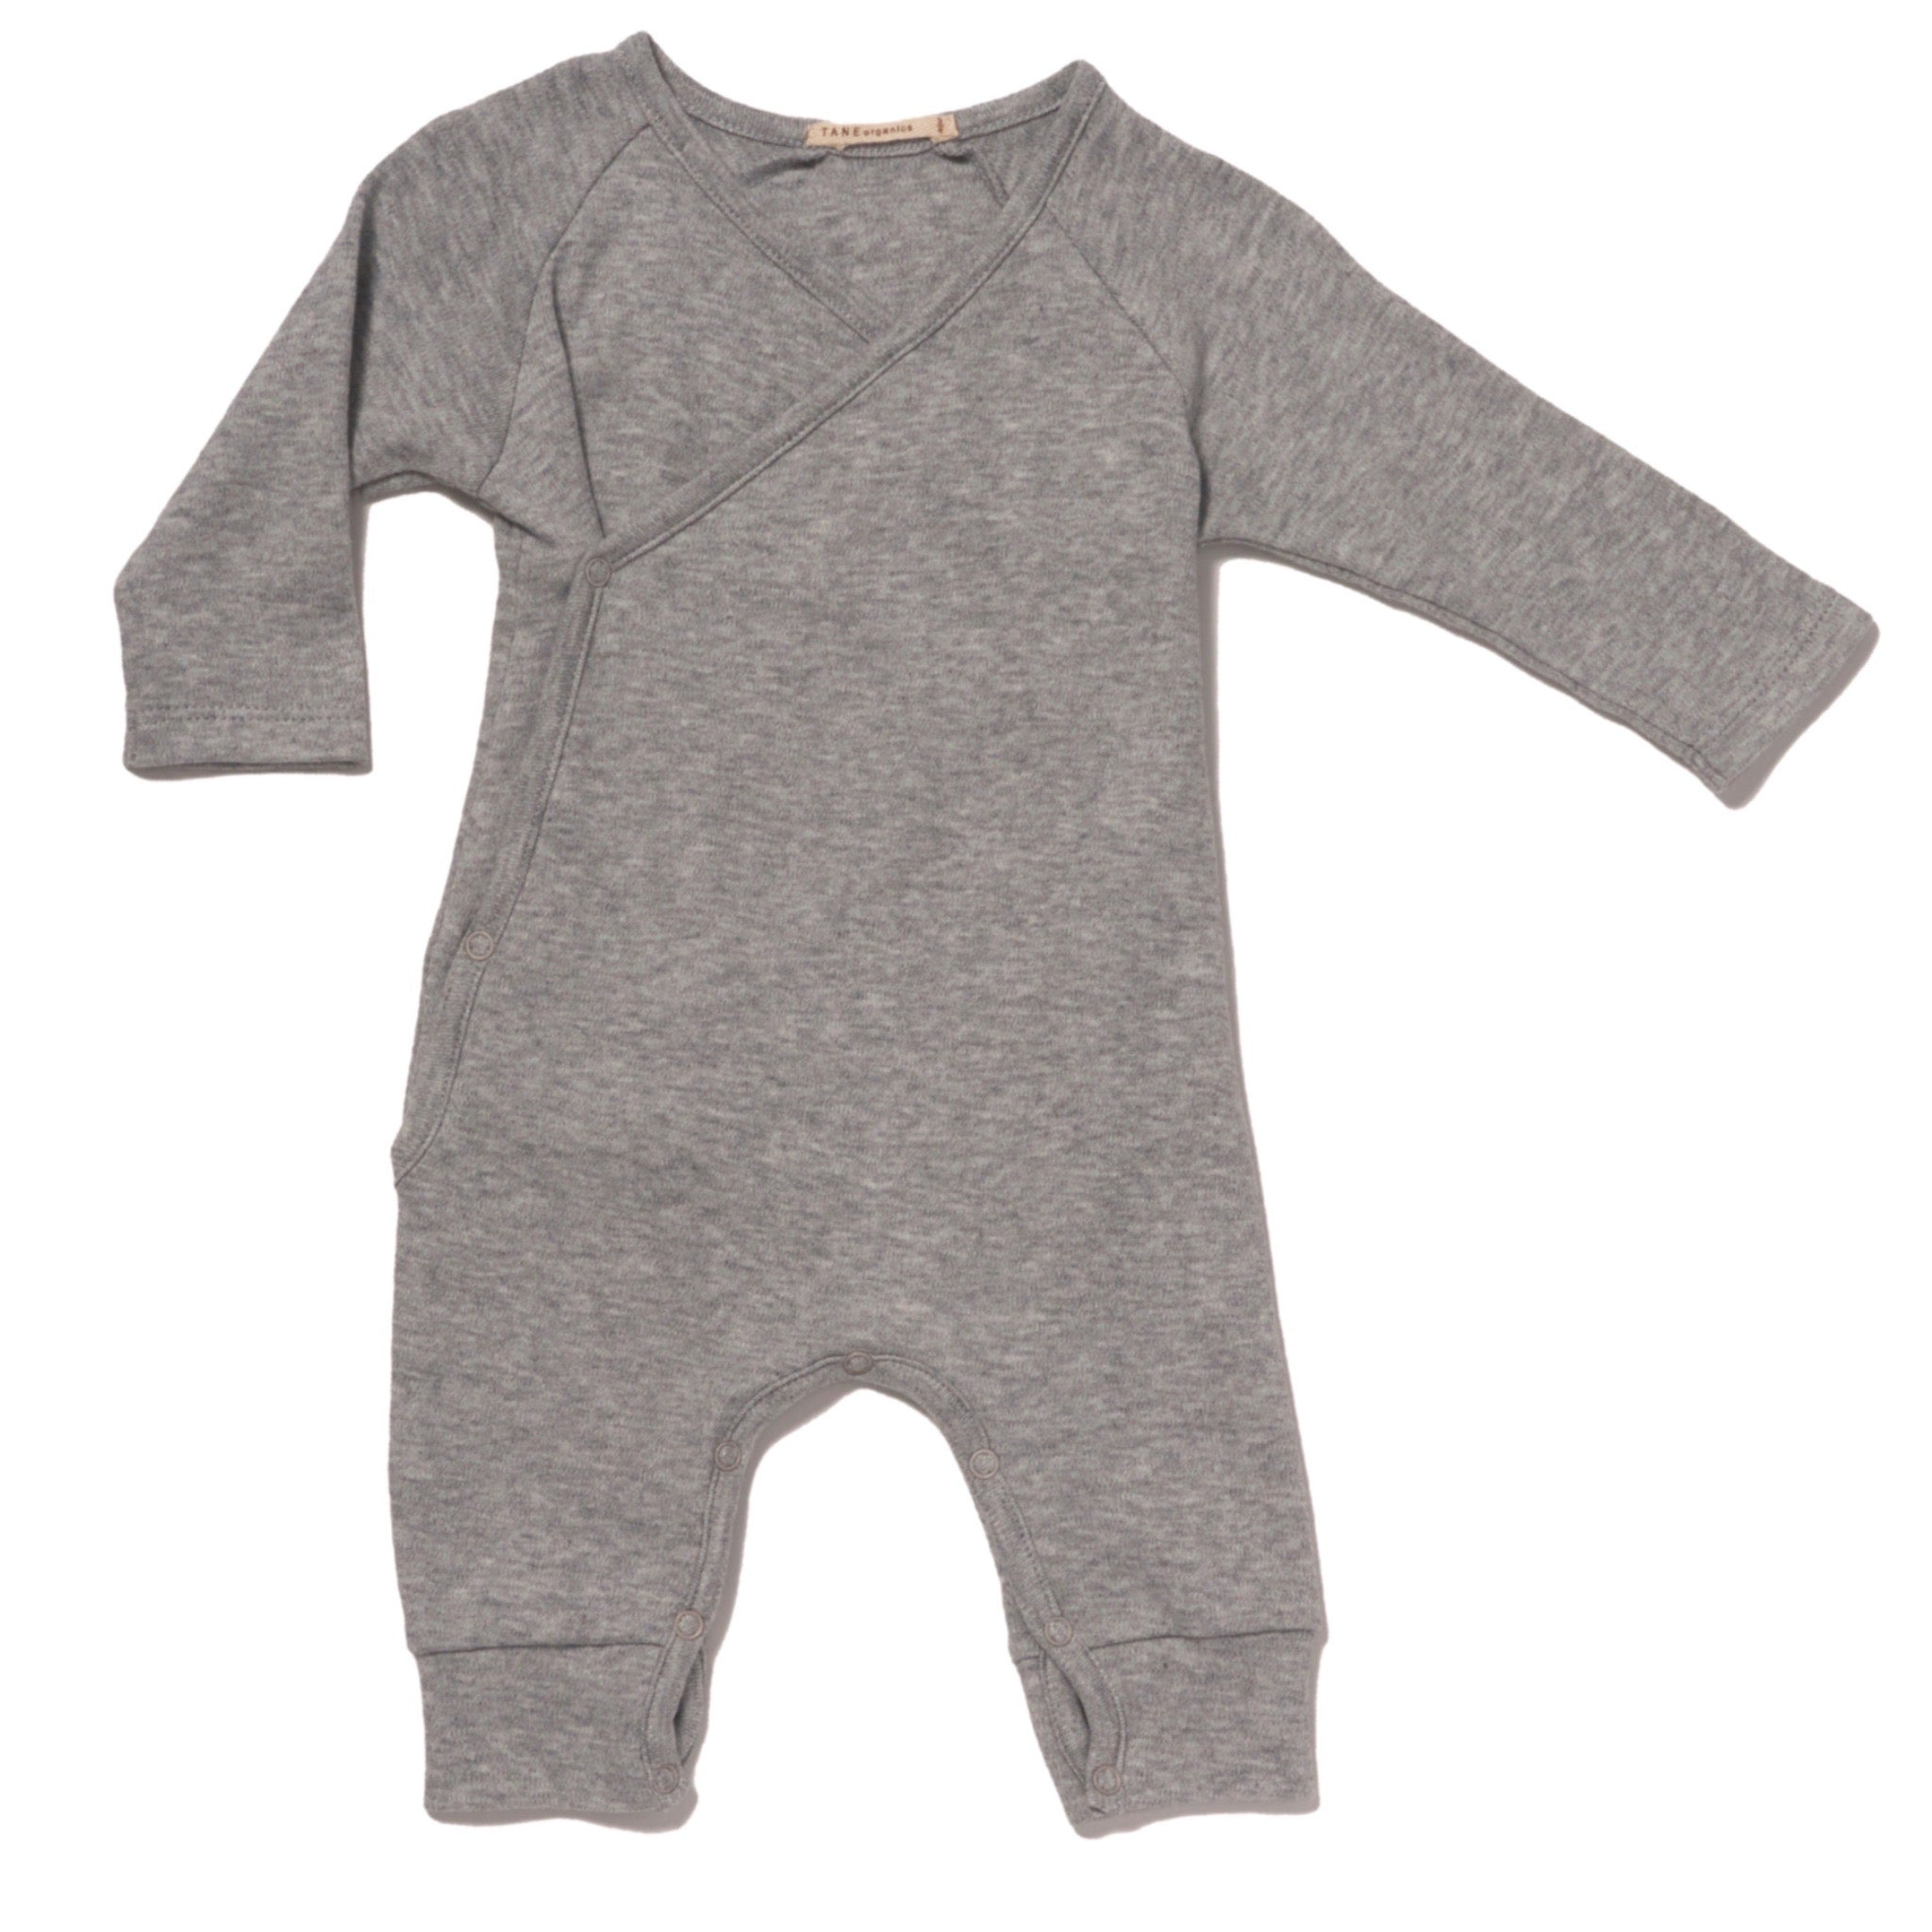 Long Sleeved Kimono Playsuit in Brushed Heathered Knit